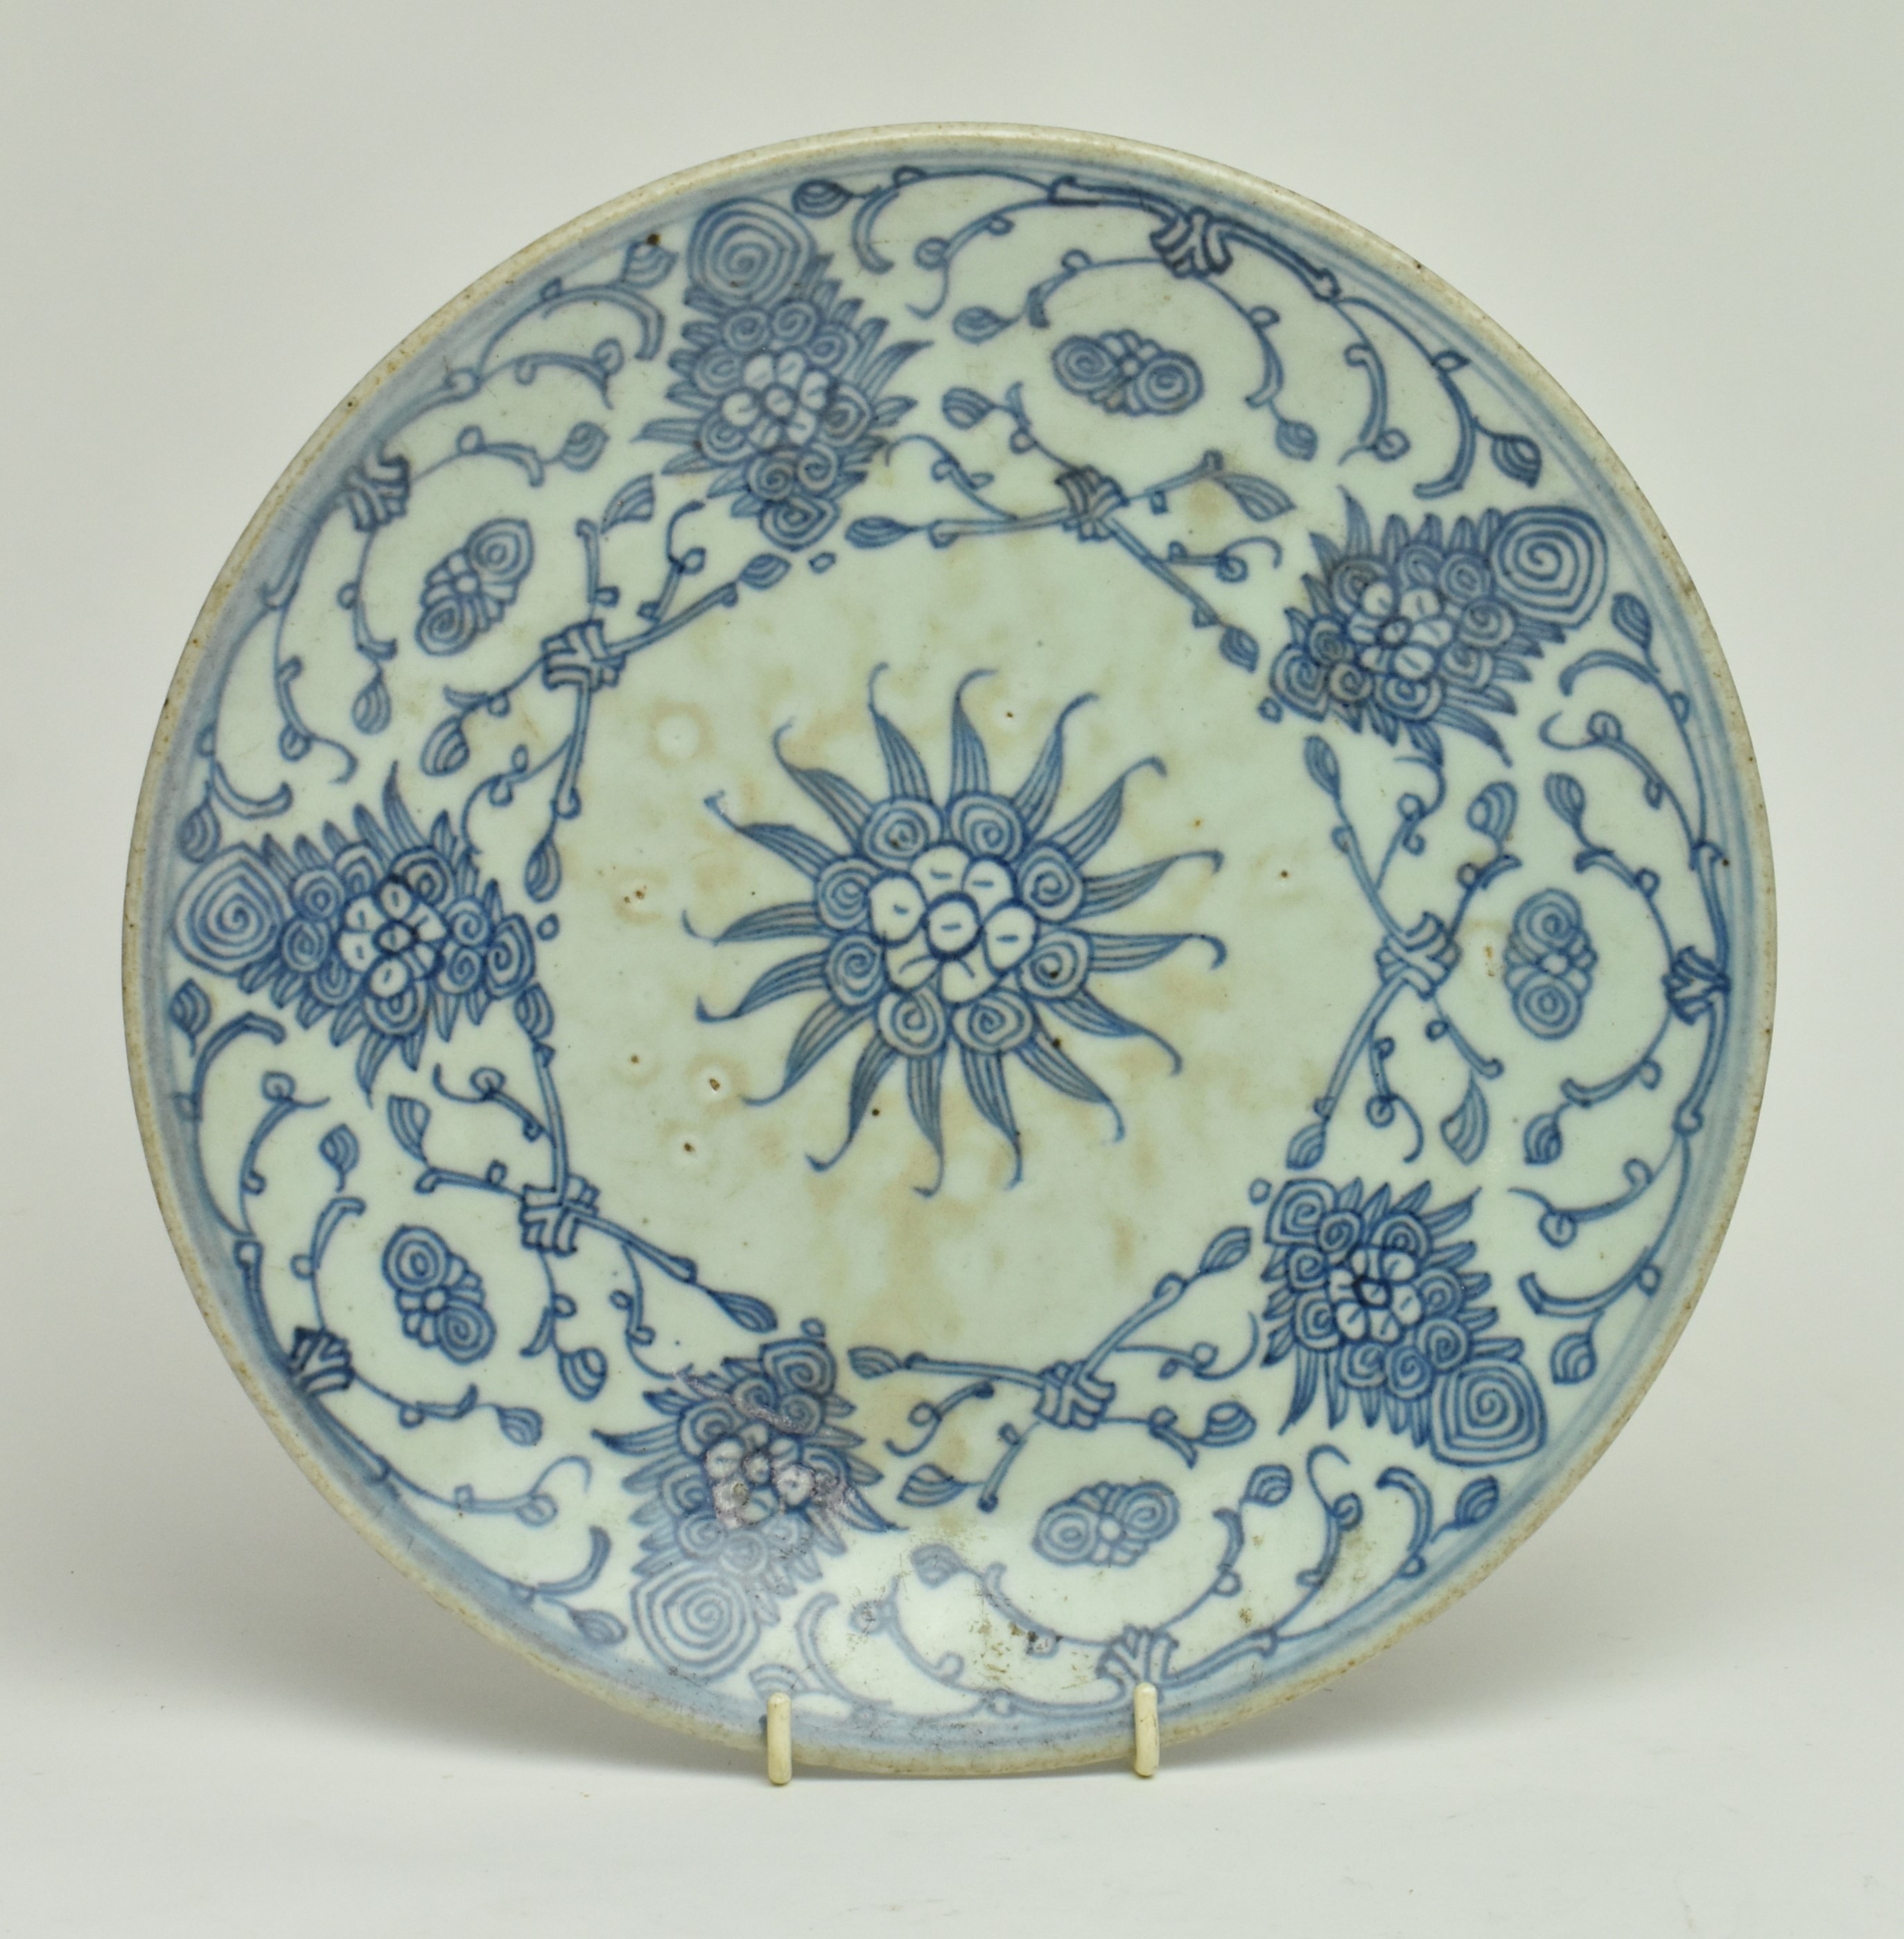 QING DAOGUANG PERIOD BLUE AND WHITE PLATE 清 道光青花盘 - Image 2 of 7